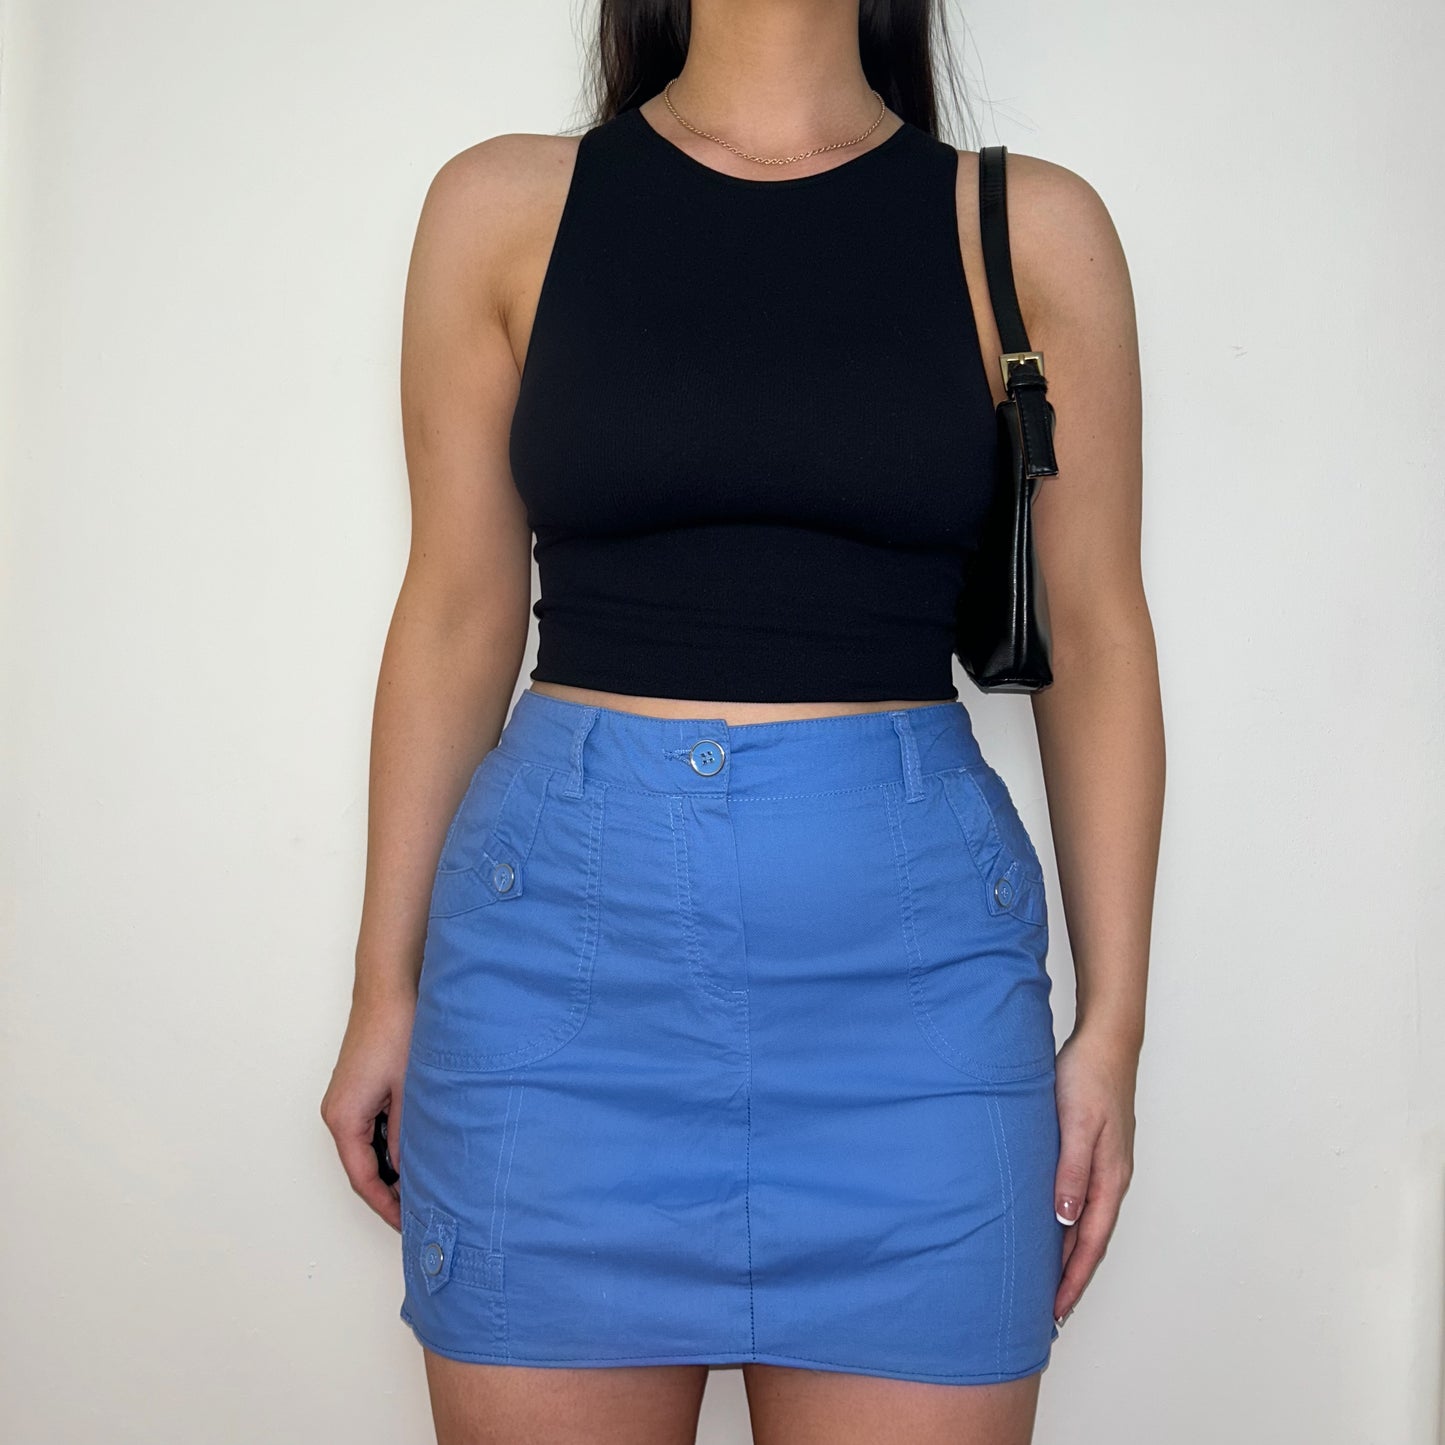 blue mini cargo skirt shown on a model wearing a black sleeveless crop top and black shoulder bag